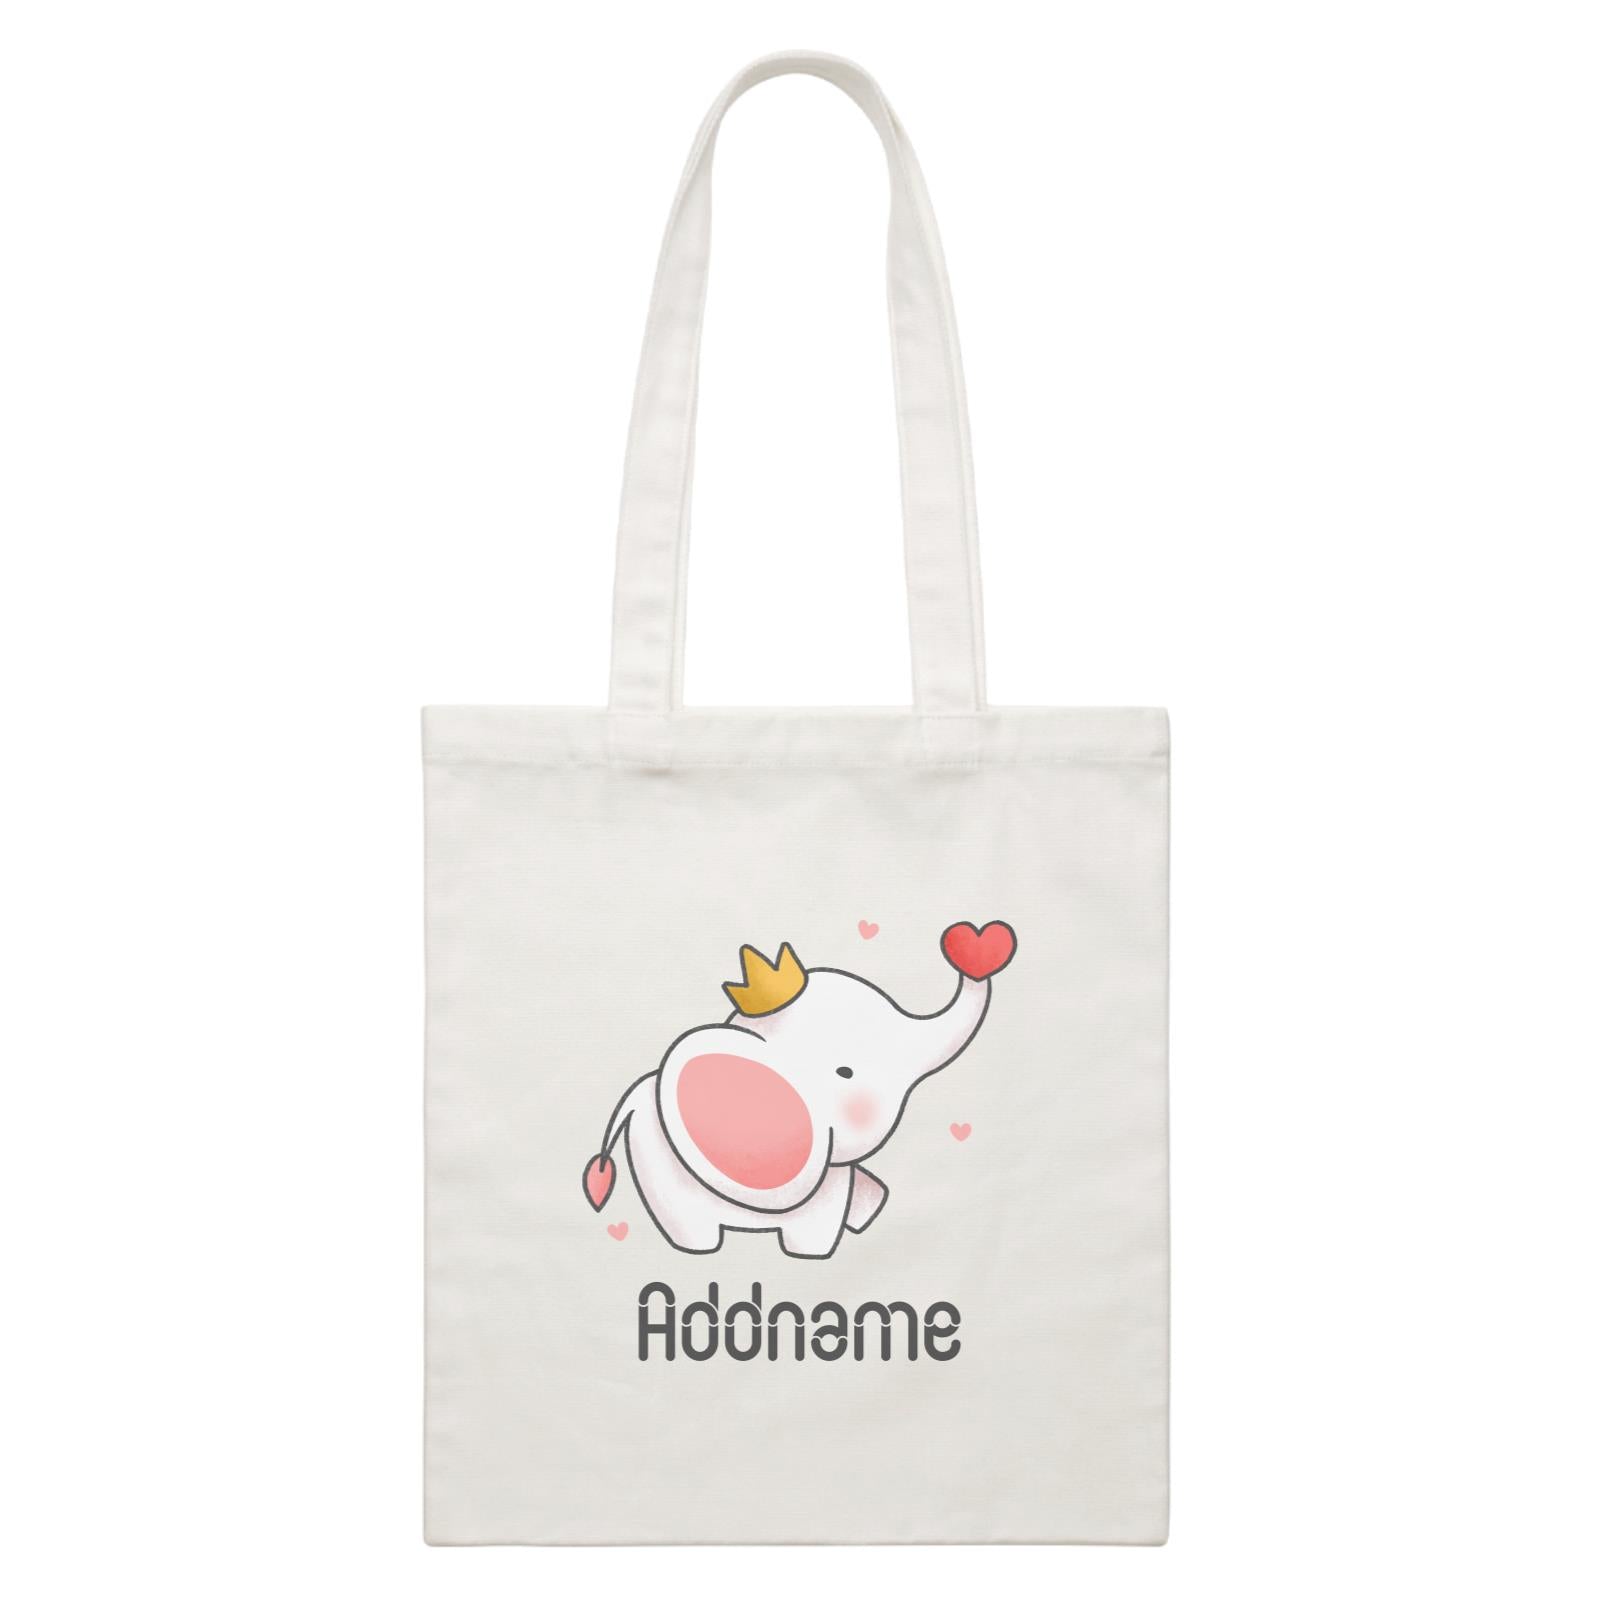 Cute Hand Drawn Style Baby Elephant with Heart and Crown Addname White Canvas Bag